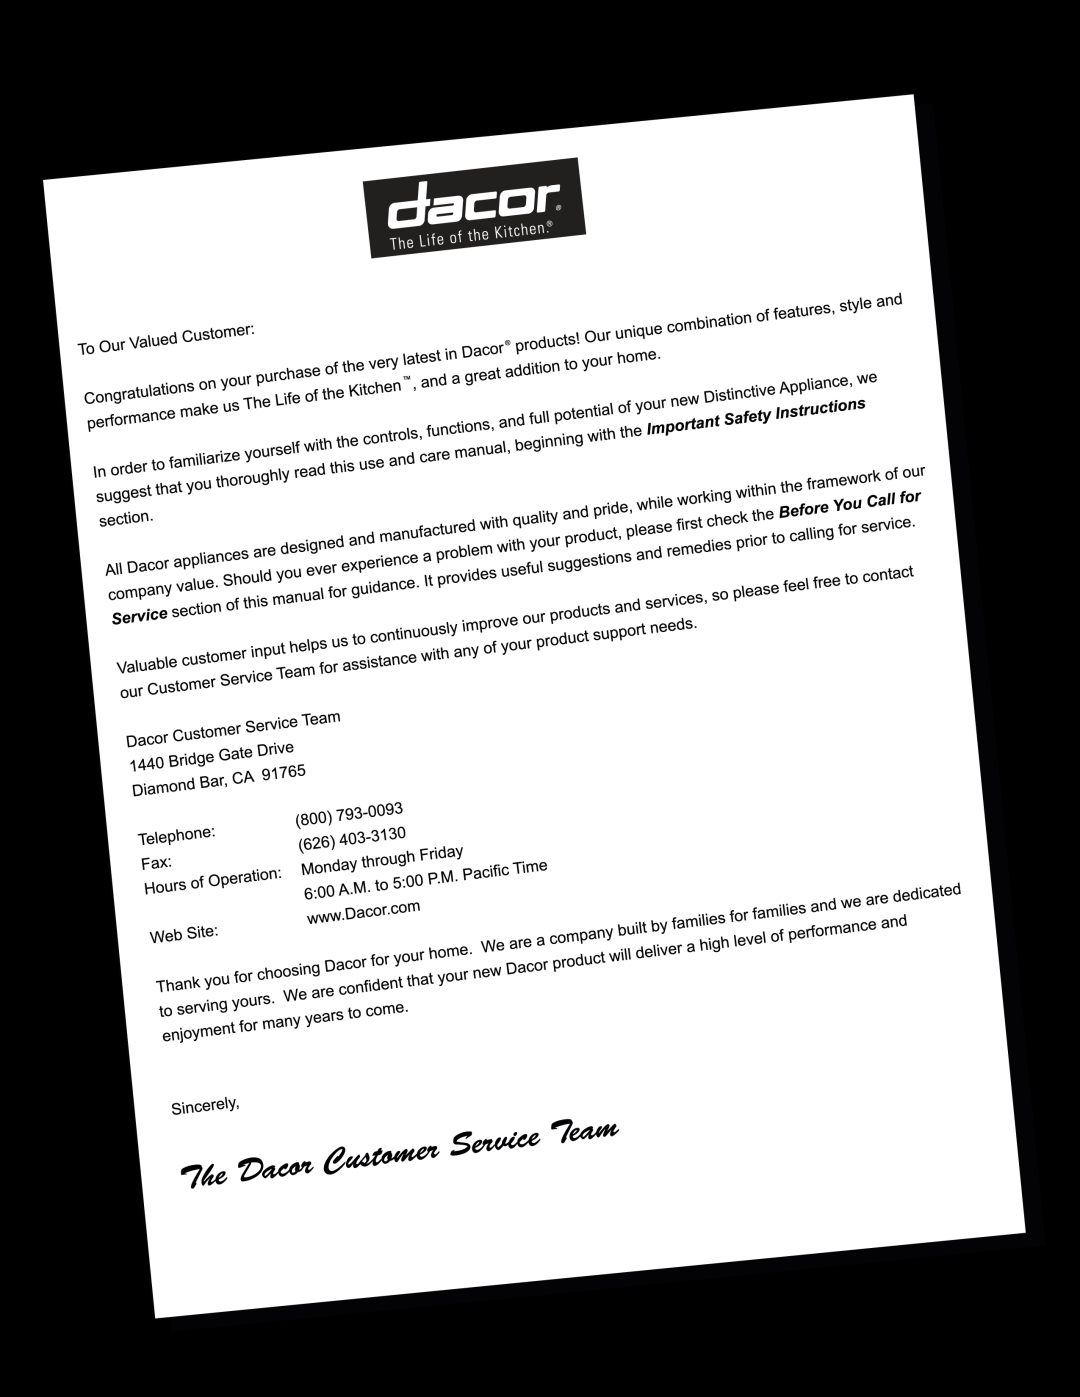 Dacor RGC365, RGC304 manual Dacor, all rights reserved 